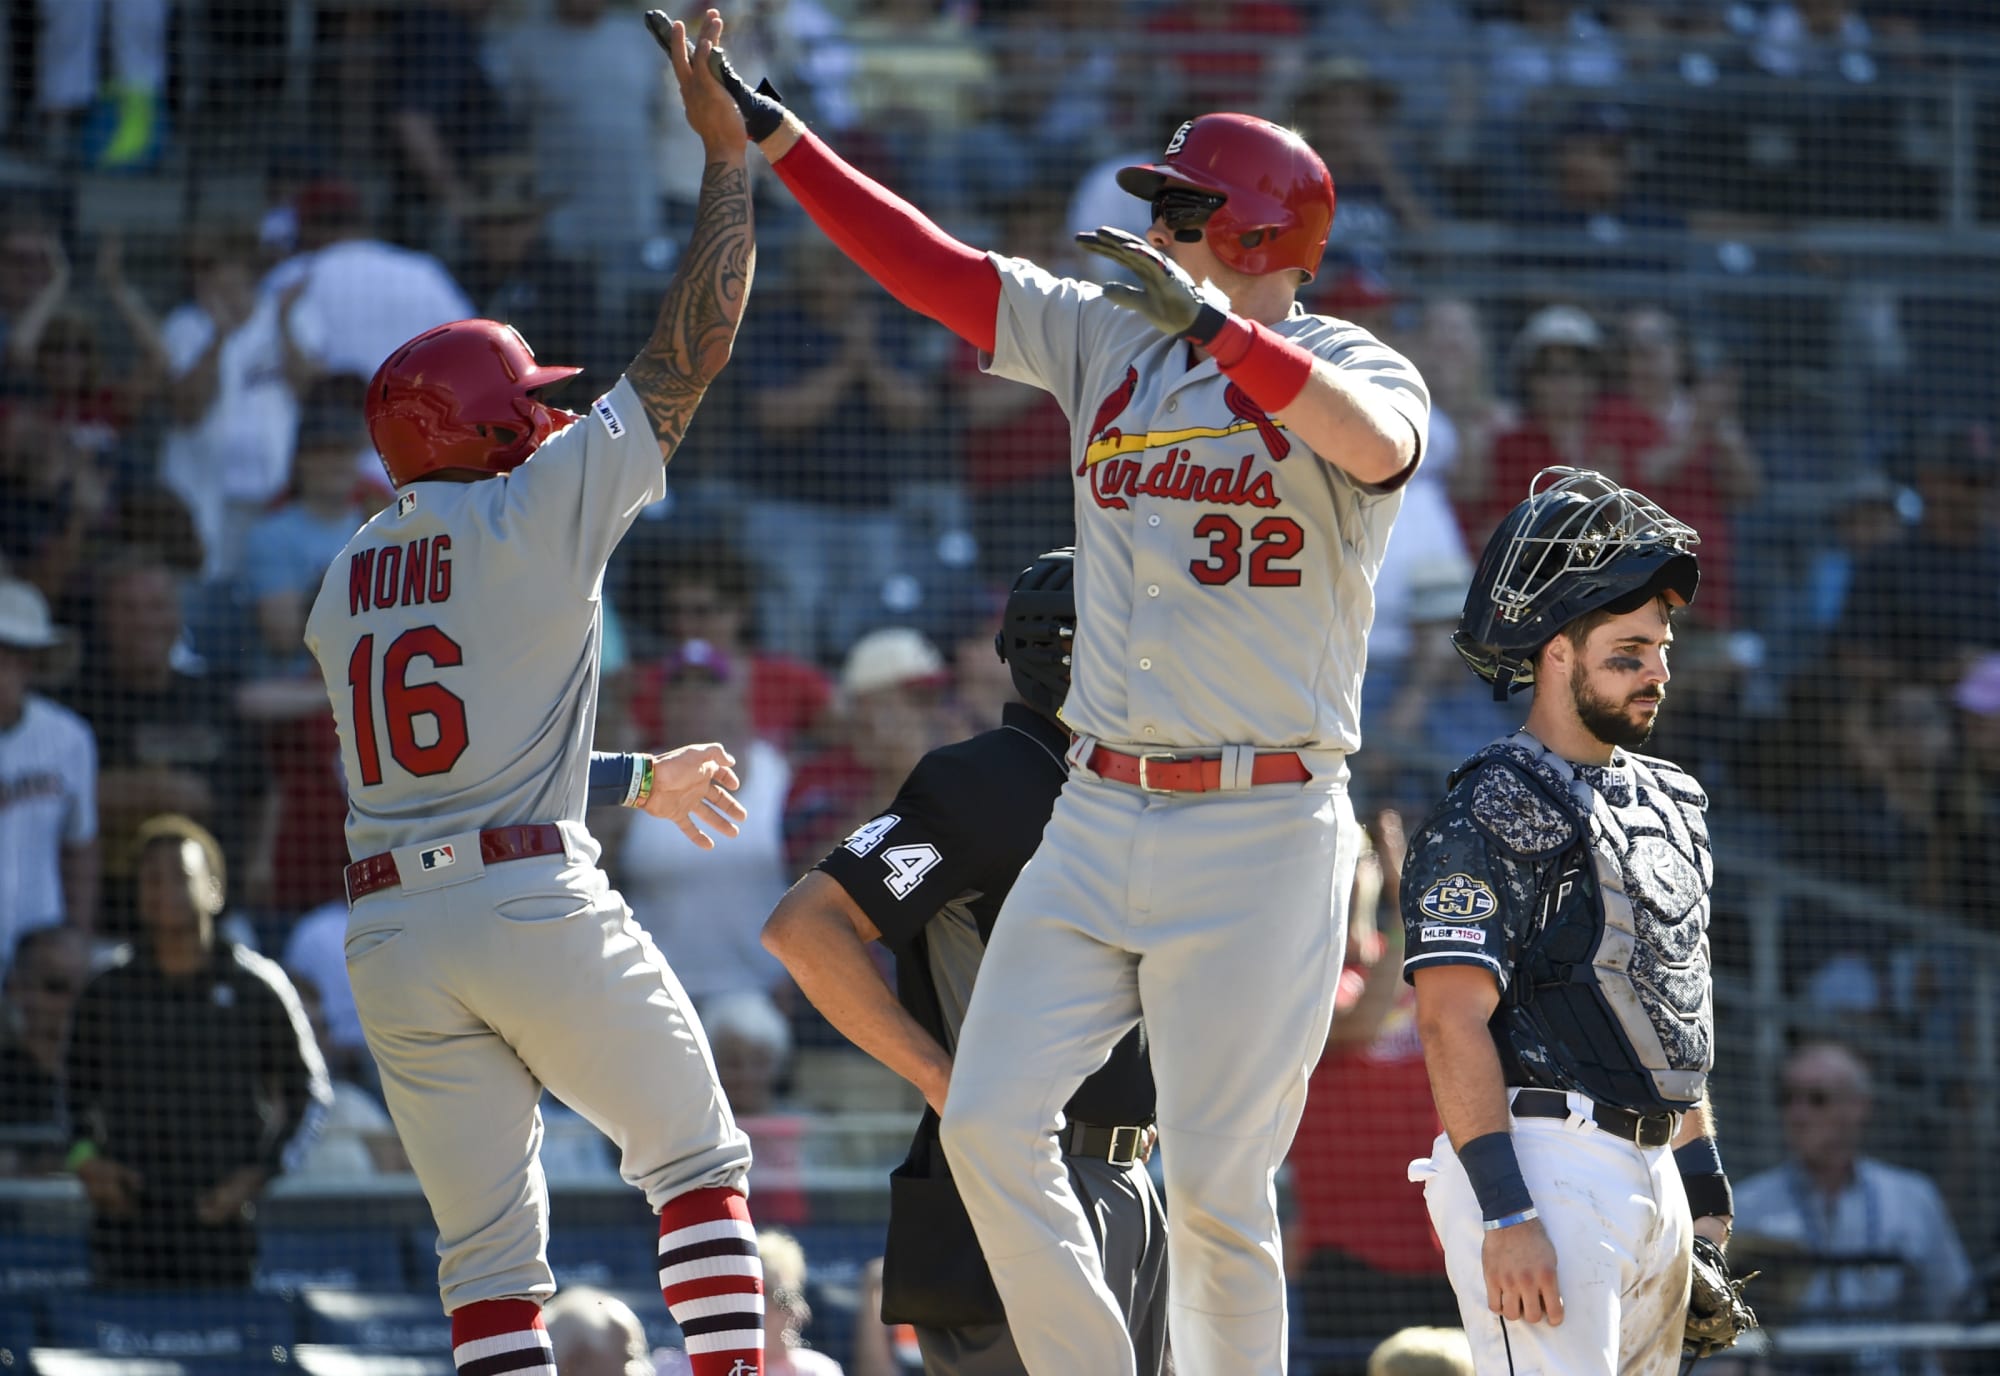 San Diego Padres fall to St. Louis Cardinals in extra innings.